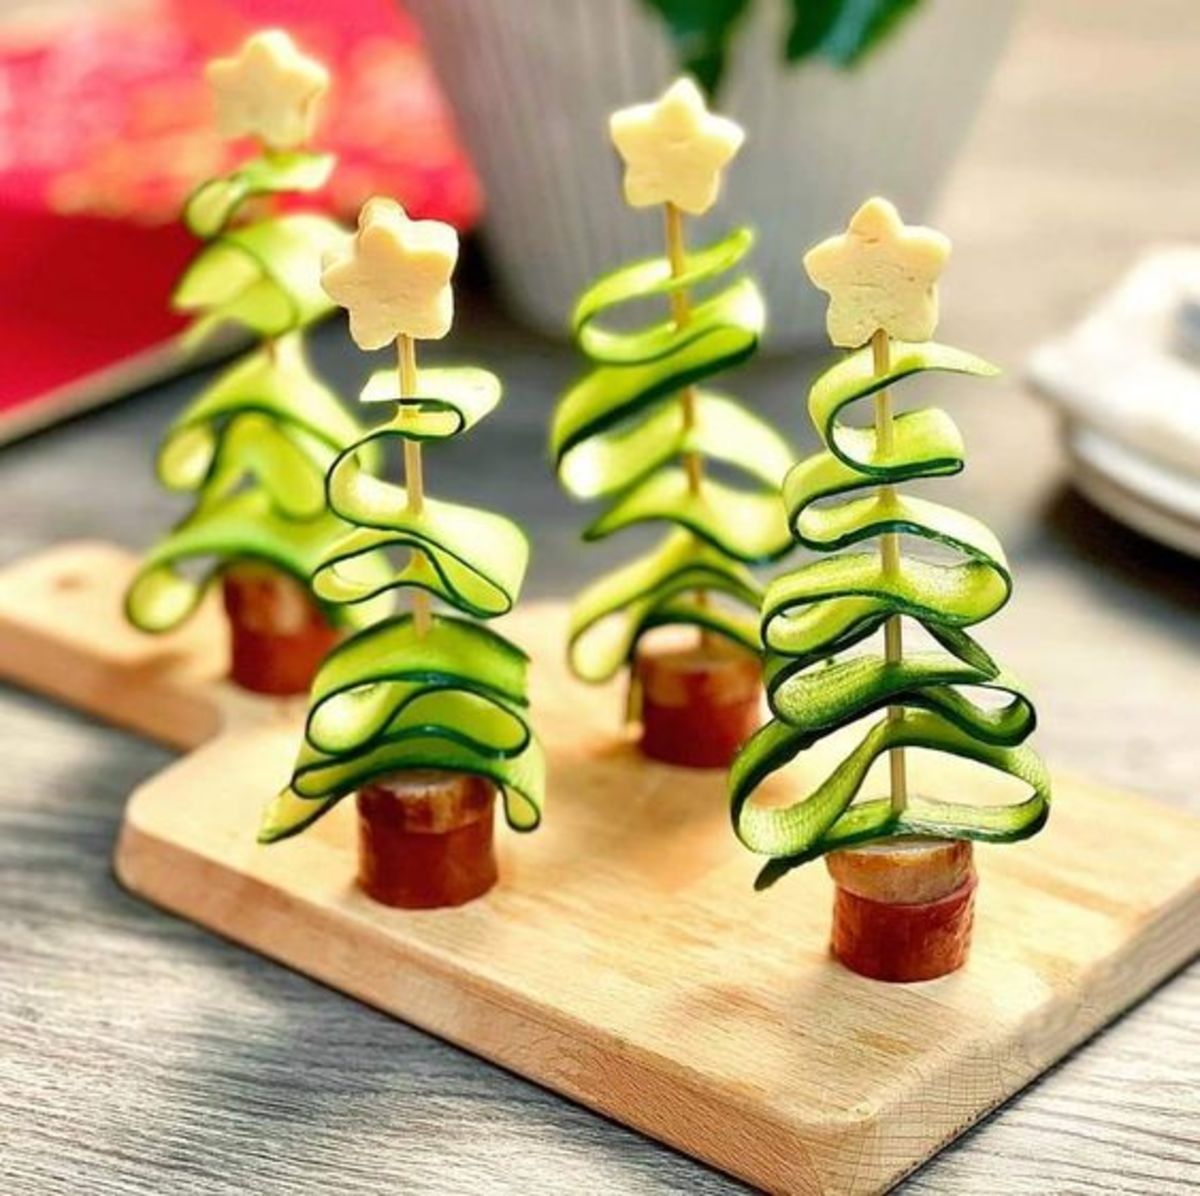 50+ Easy Make-Ahead Christmas Appetizers and Finger Foods